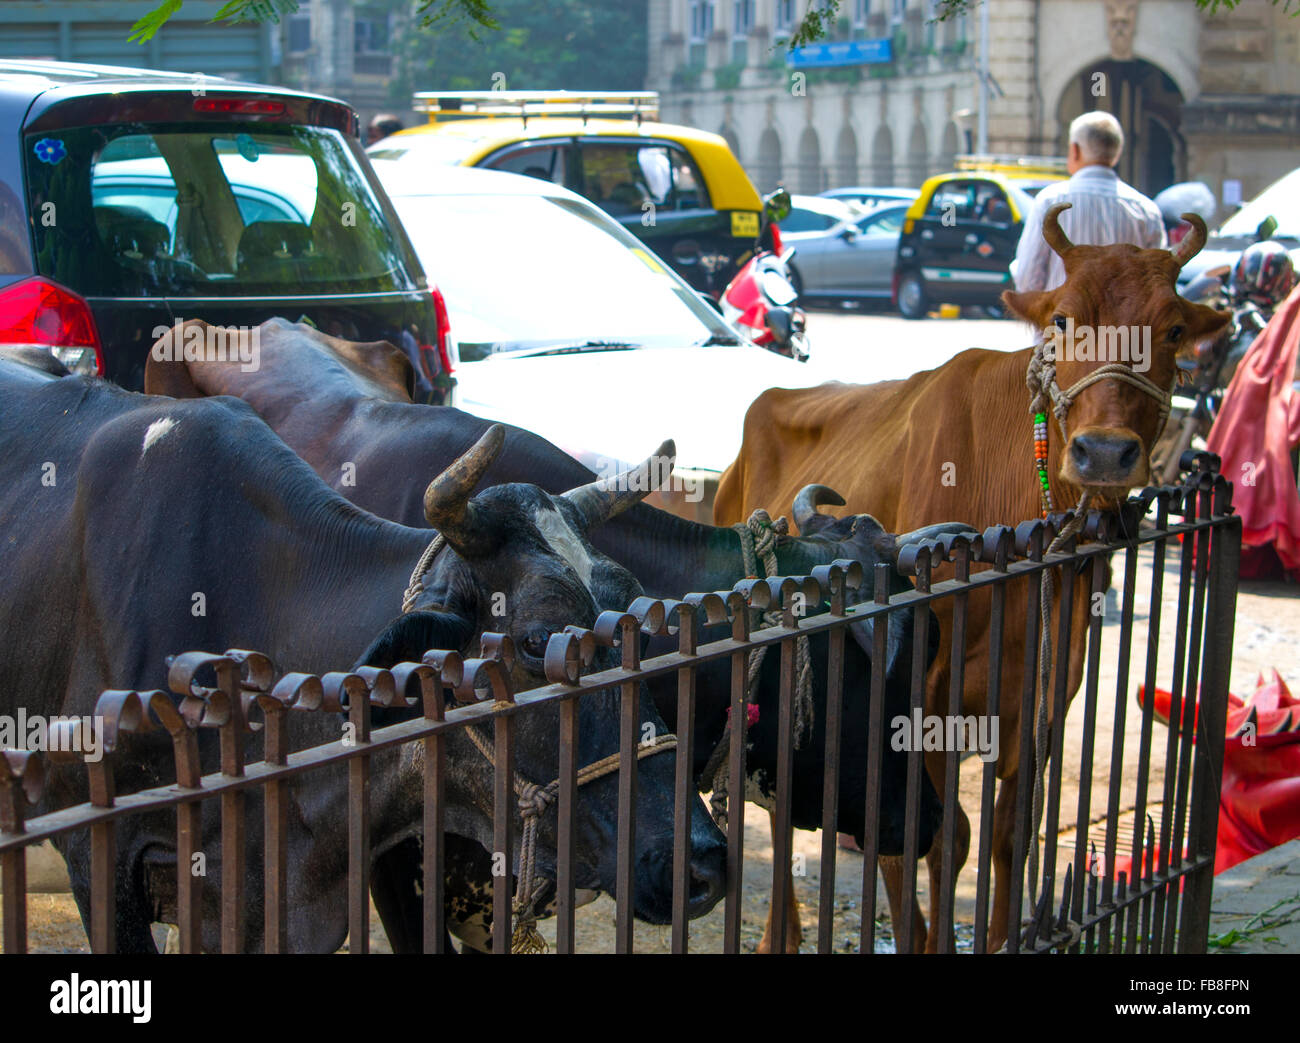 pet the cow in the city of mumbai,pets animals,cows,animals,cattle,a cattle,a hoofed animal,looks,costs,a sacred animal of india Stock Photo